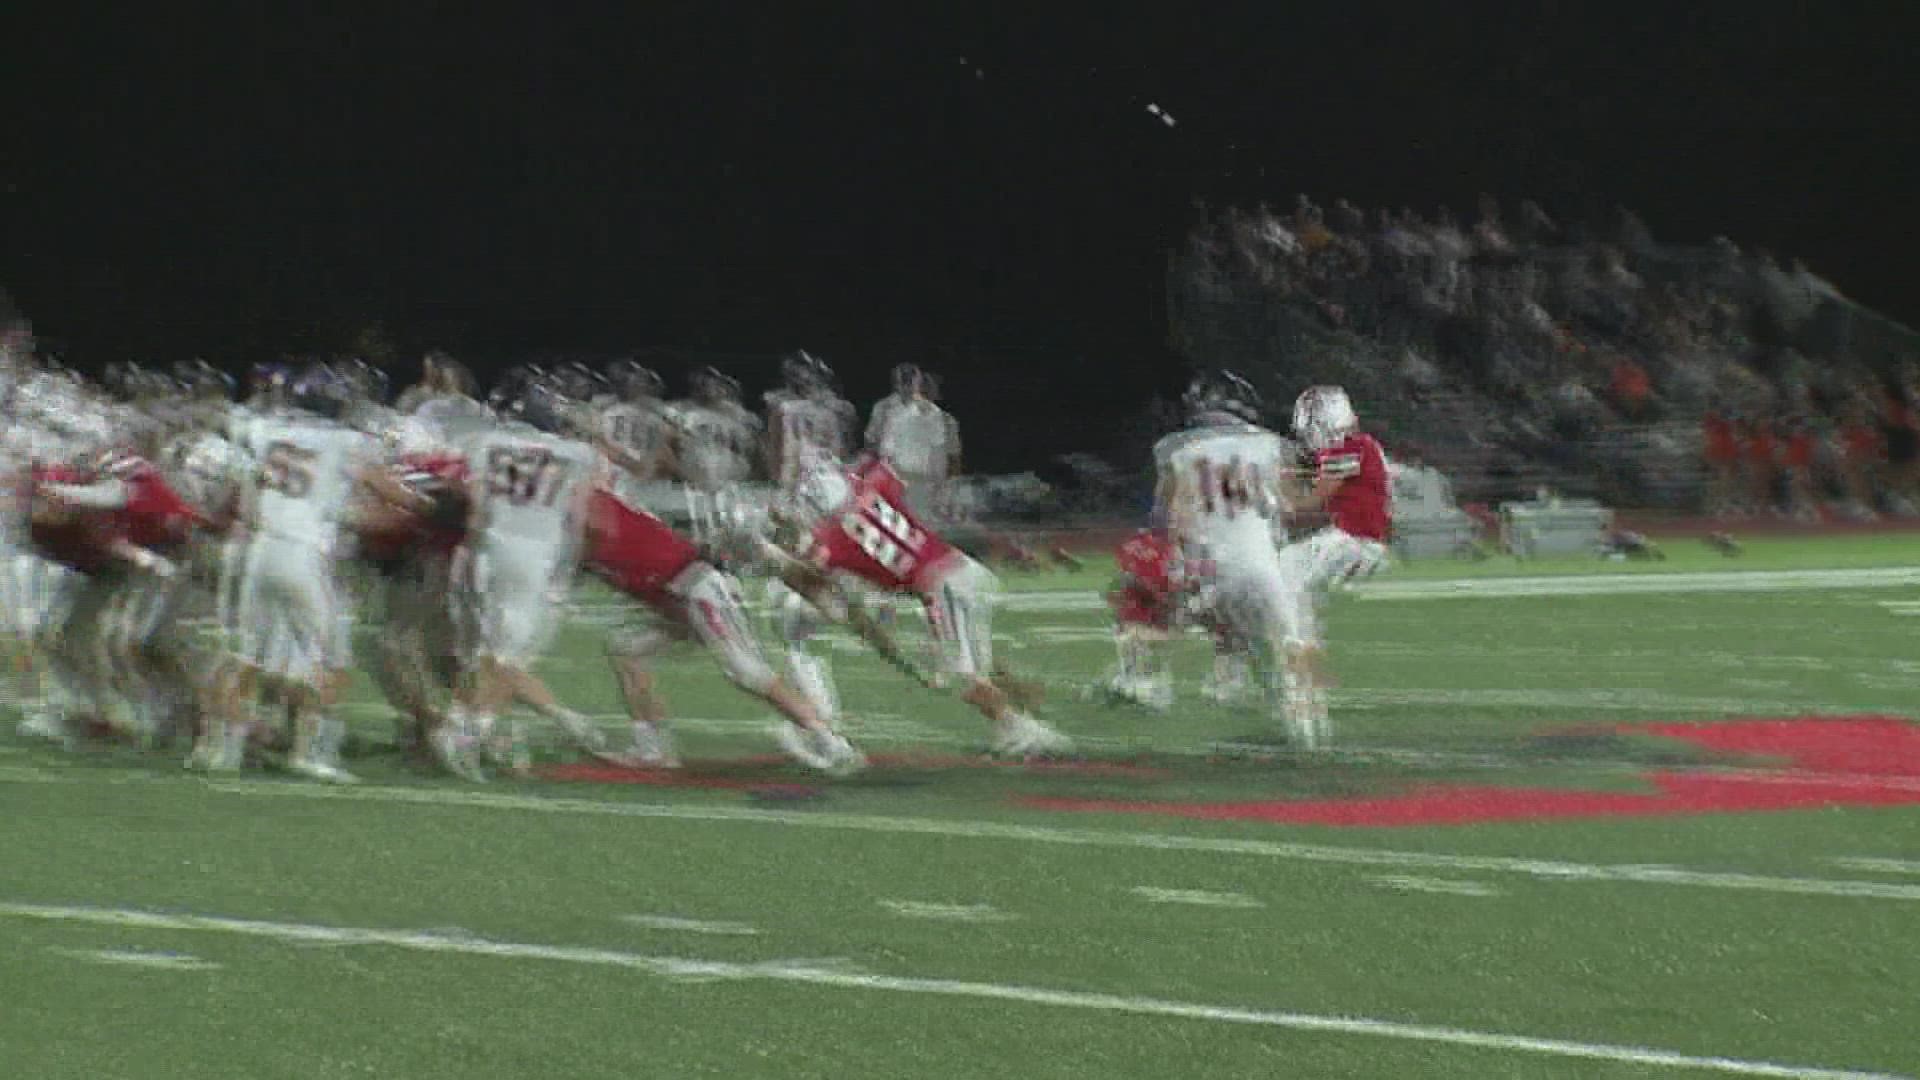 Assumption offense couldn't get going against #3 ranked Solon. Knights fall 38-10.